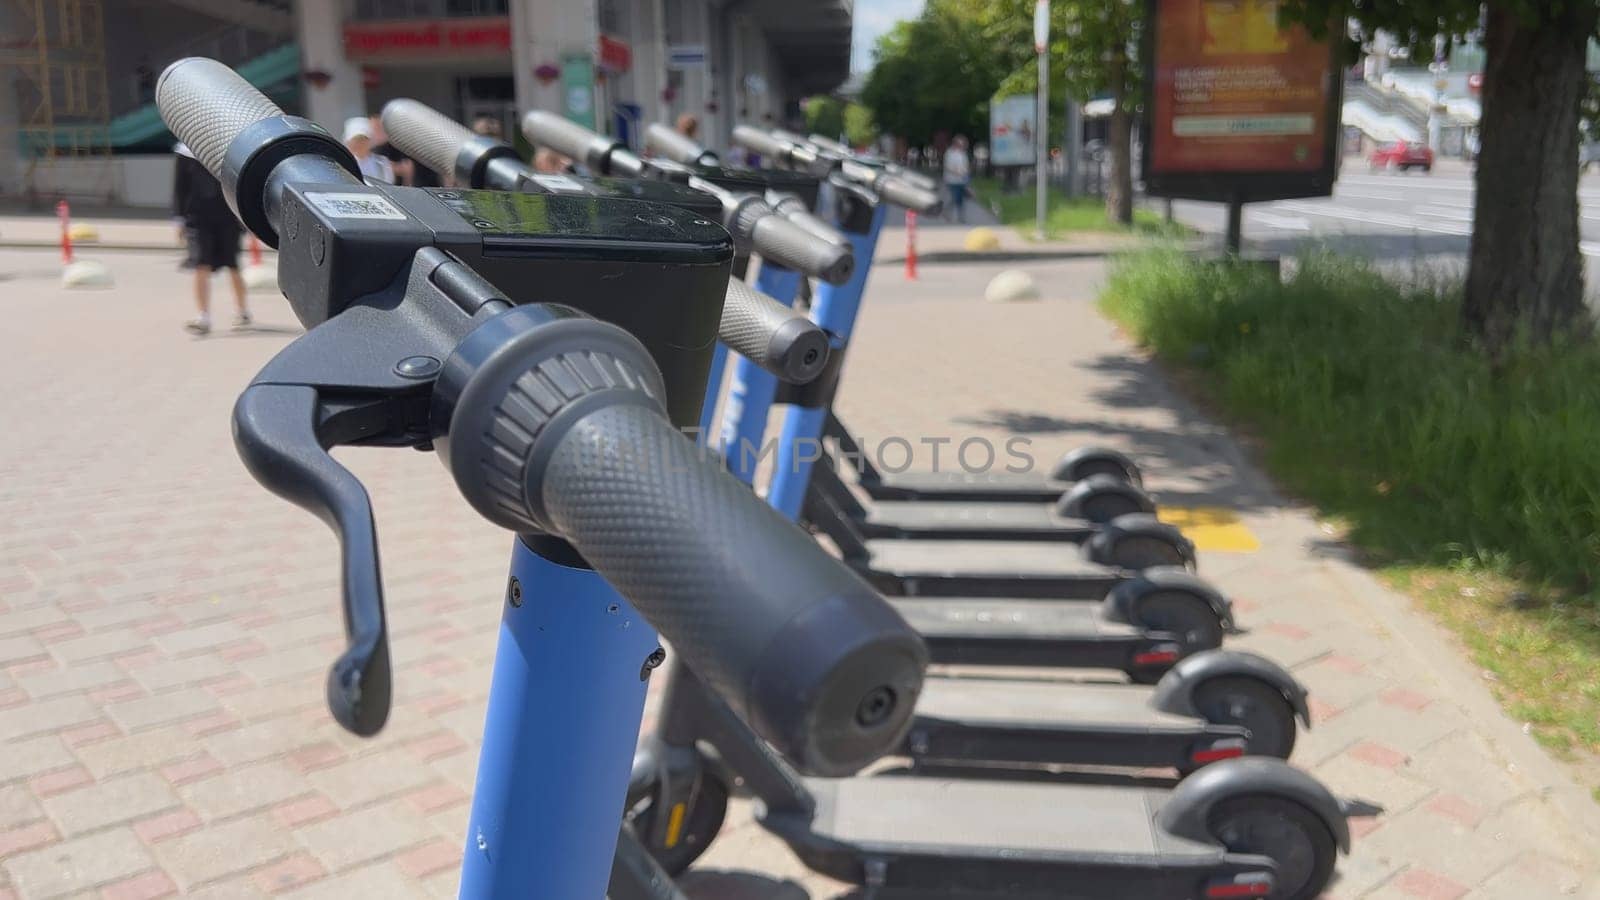 Electric scooters are on the street waiting to be rented. by DovidPro